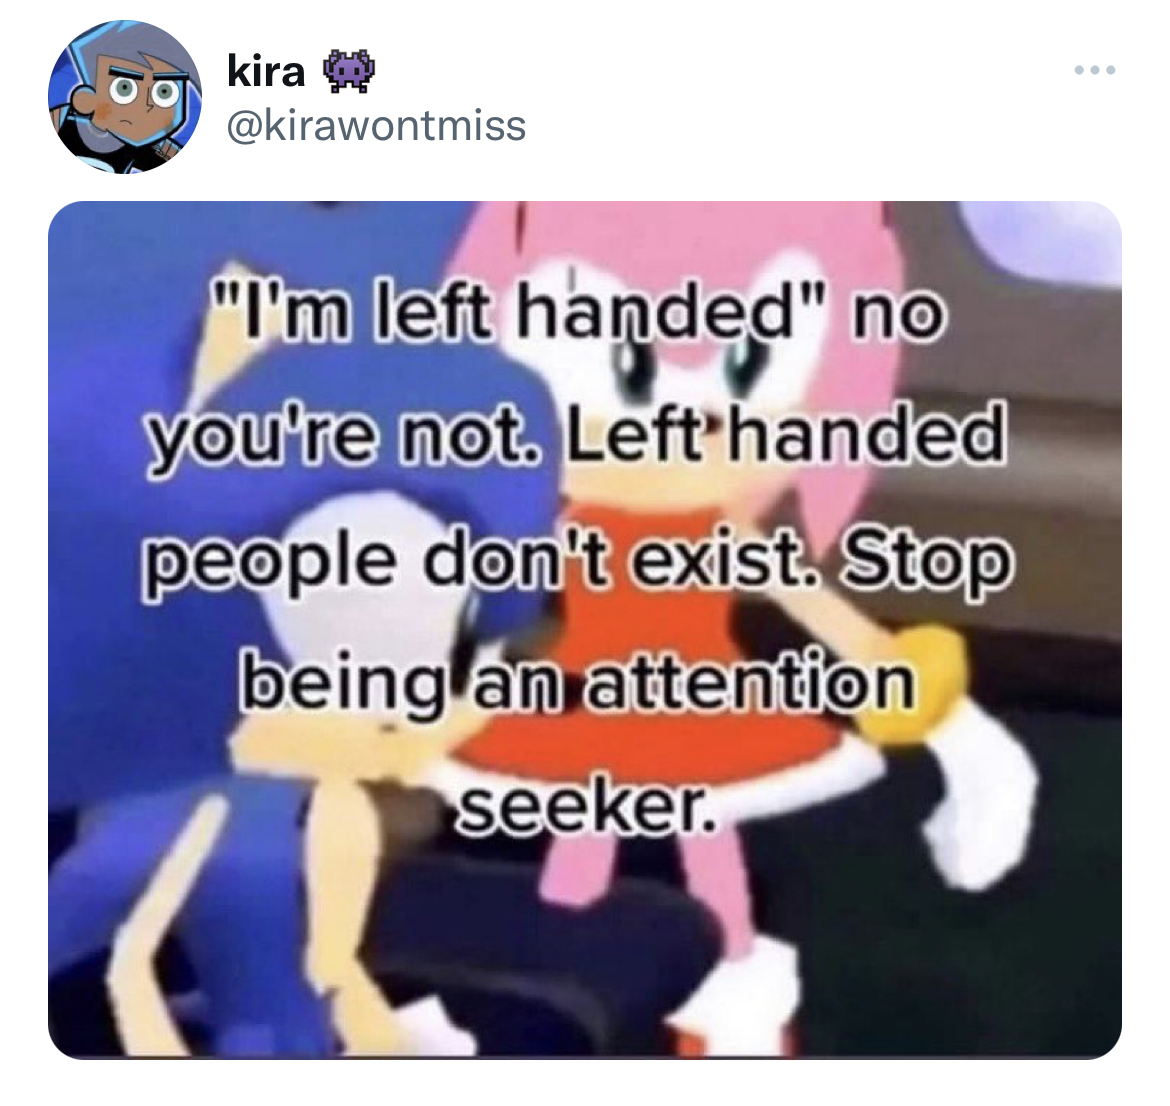 Fresh and funny tweets - i m left handed no you re not - kira . "I'm left handed" no you're not. Left handed people don't exist. Stop being an attention seeker.